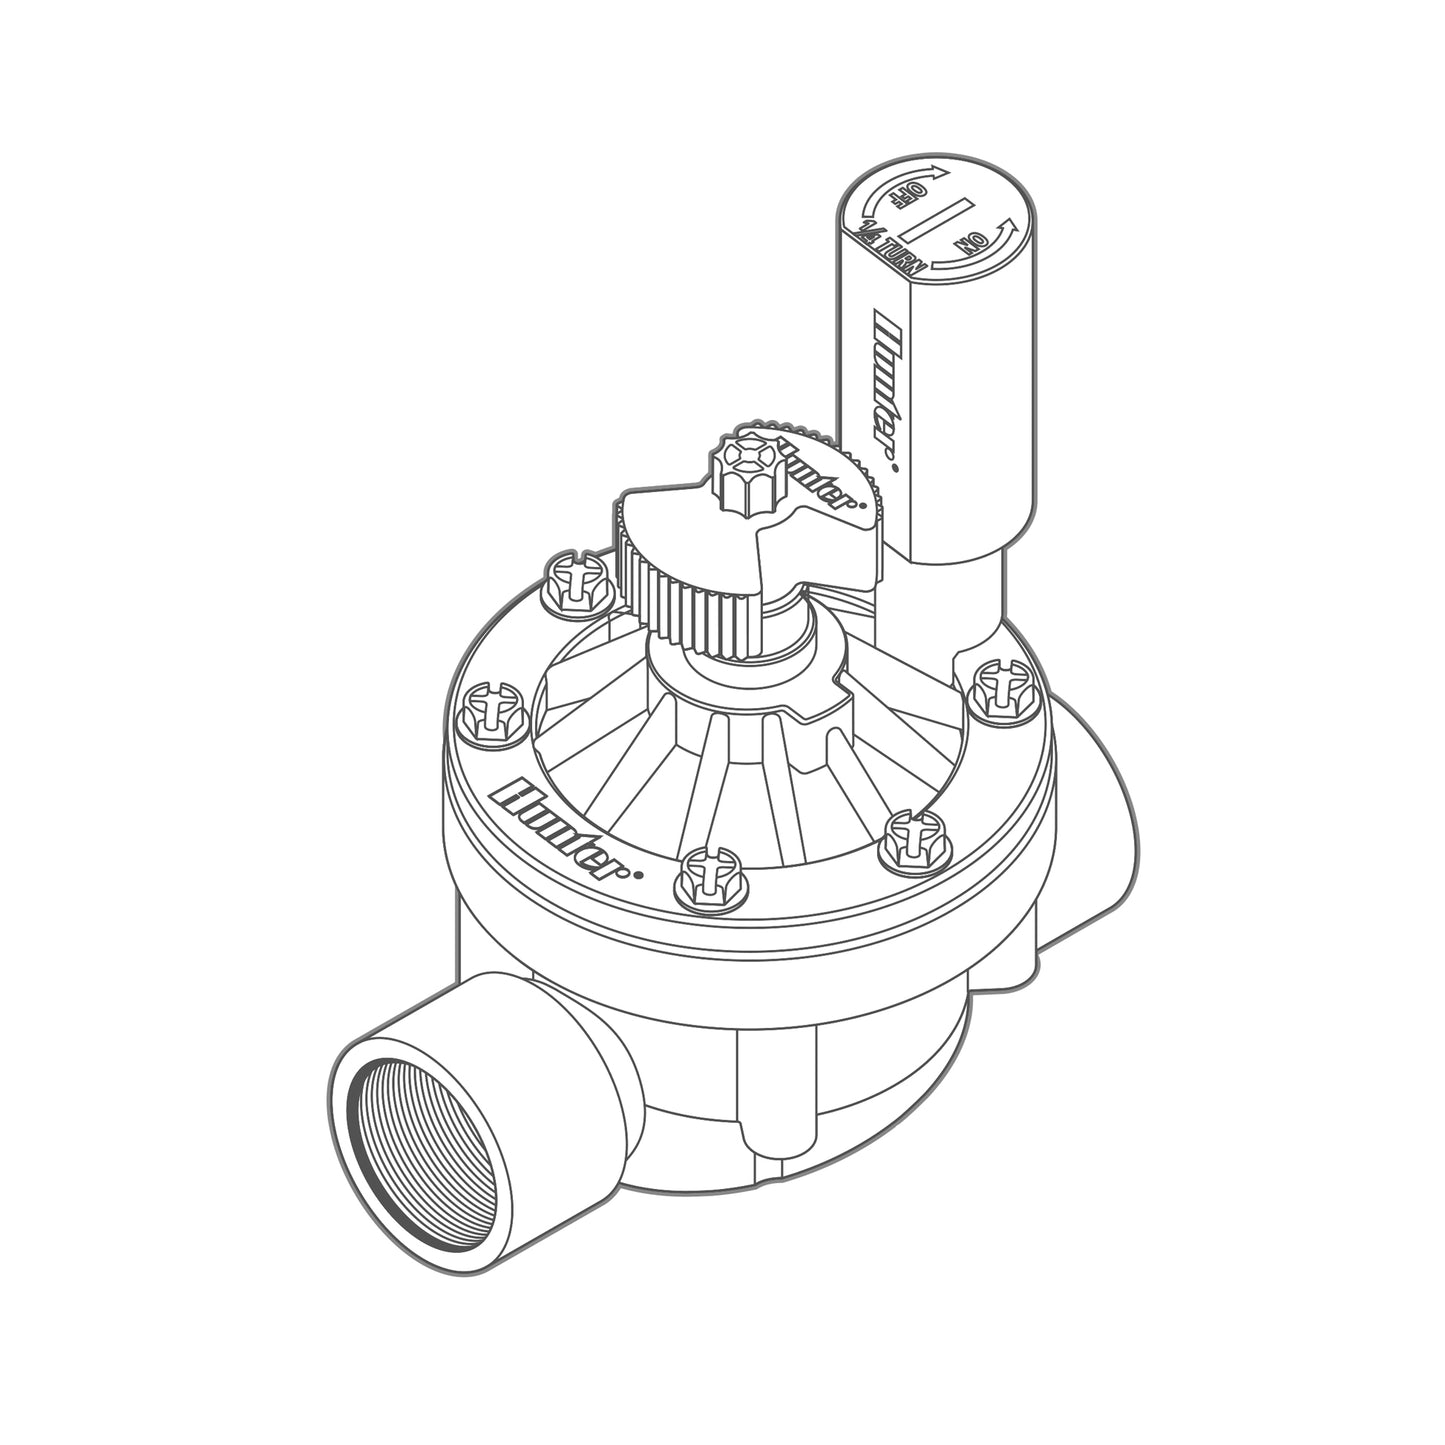 ICV-101G-FS - 1" FPT Commercial Irrigation Valve with Flow Control & Filter Sentry - ICV Series